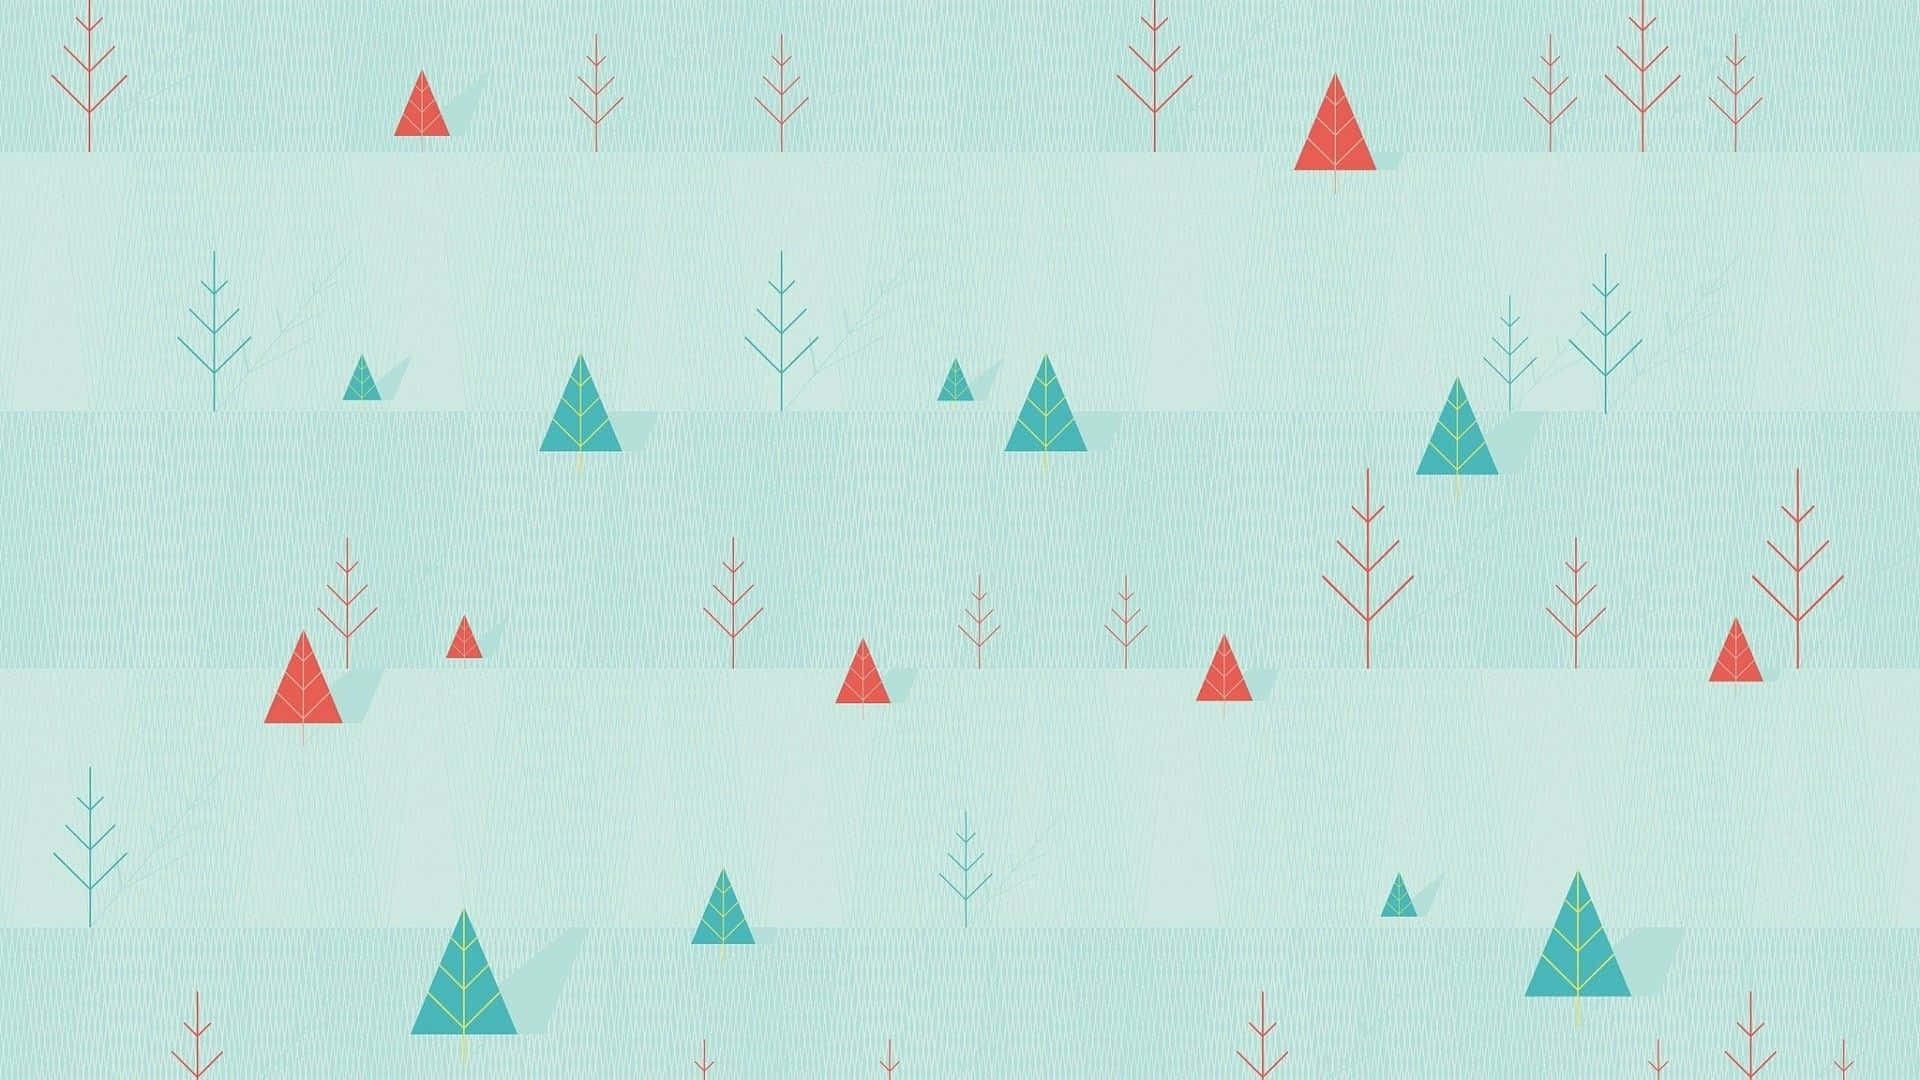 A Christmas Tree Pattern With Red And Blue Trees